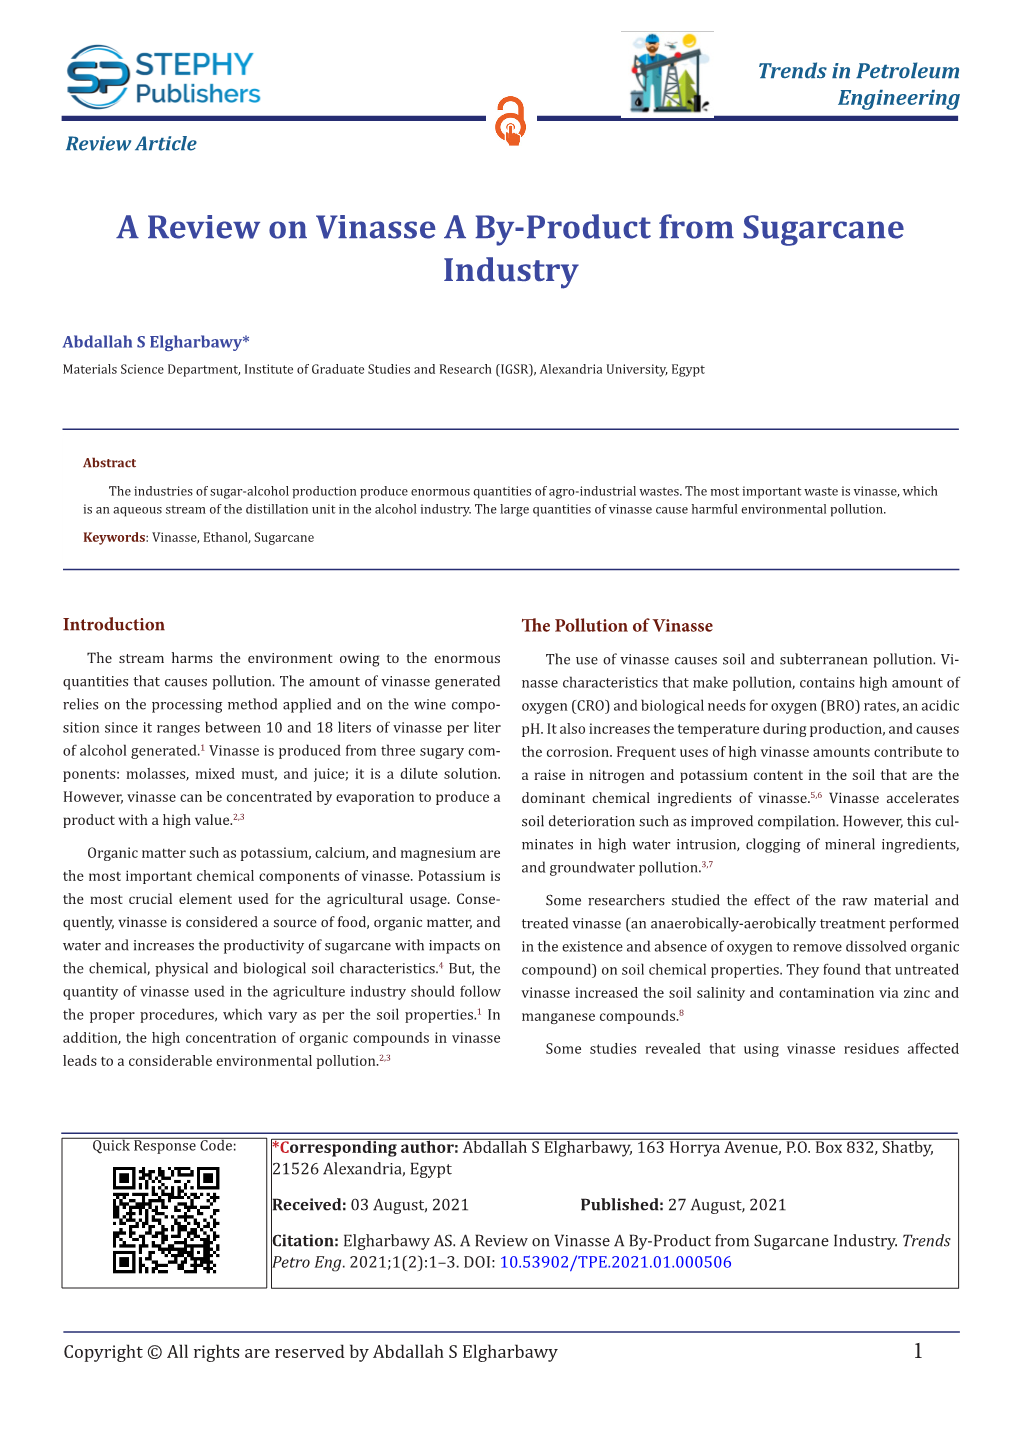 A Review on Vinasse a By-Product from Sugarcane Industry